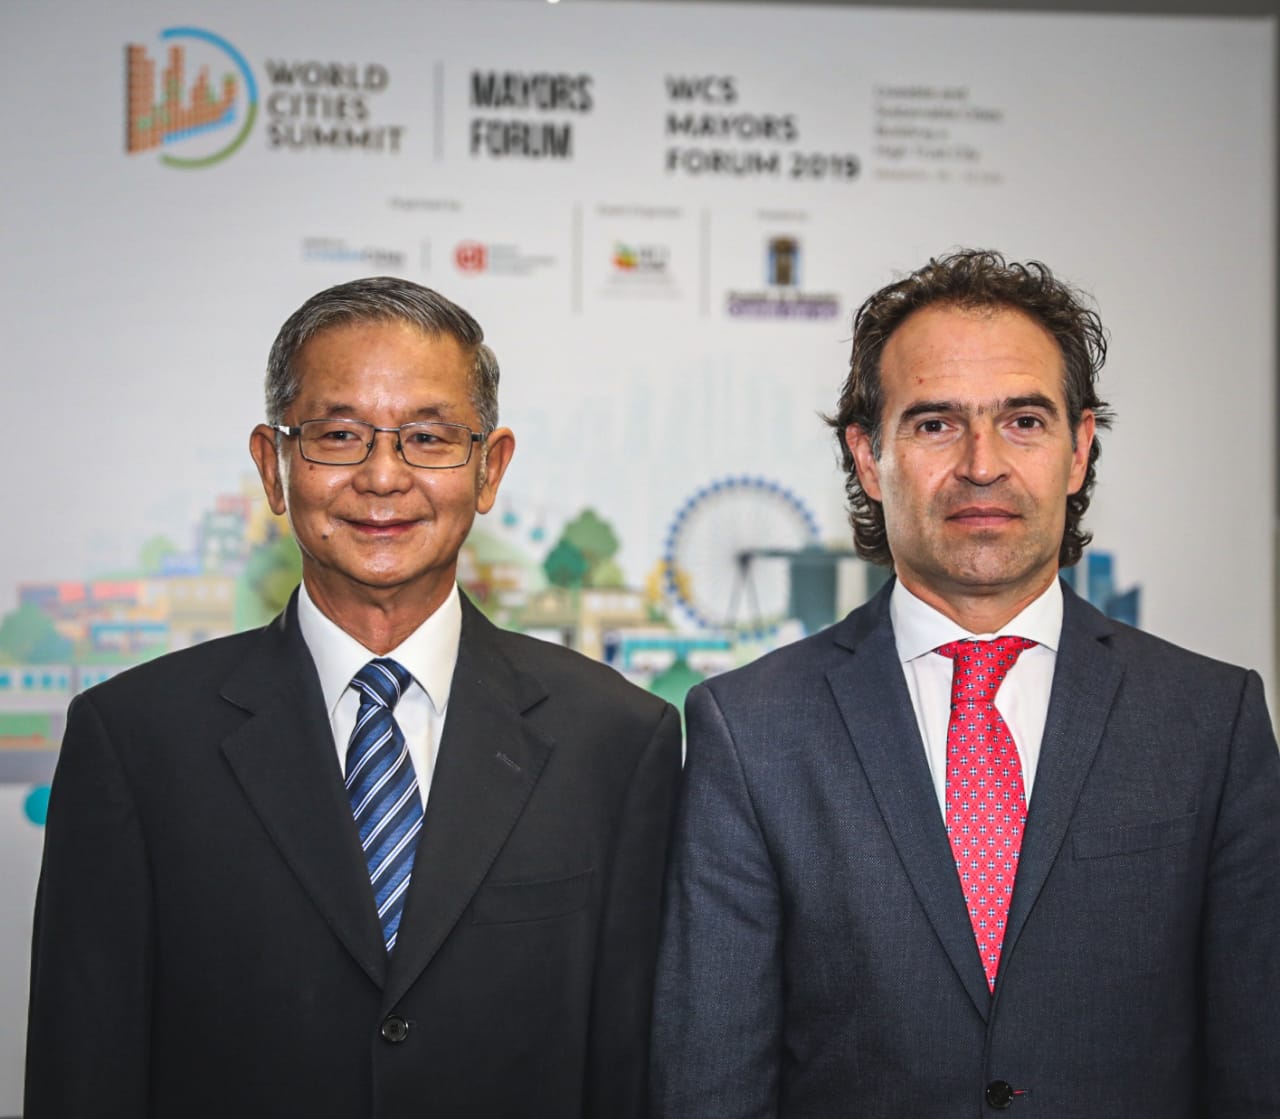 The 10th World Cities Summit Mayors Forum started today in Medellín